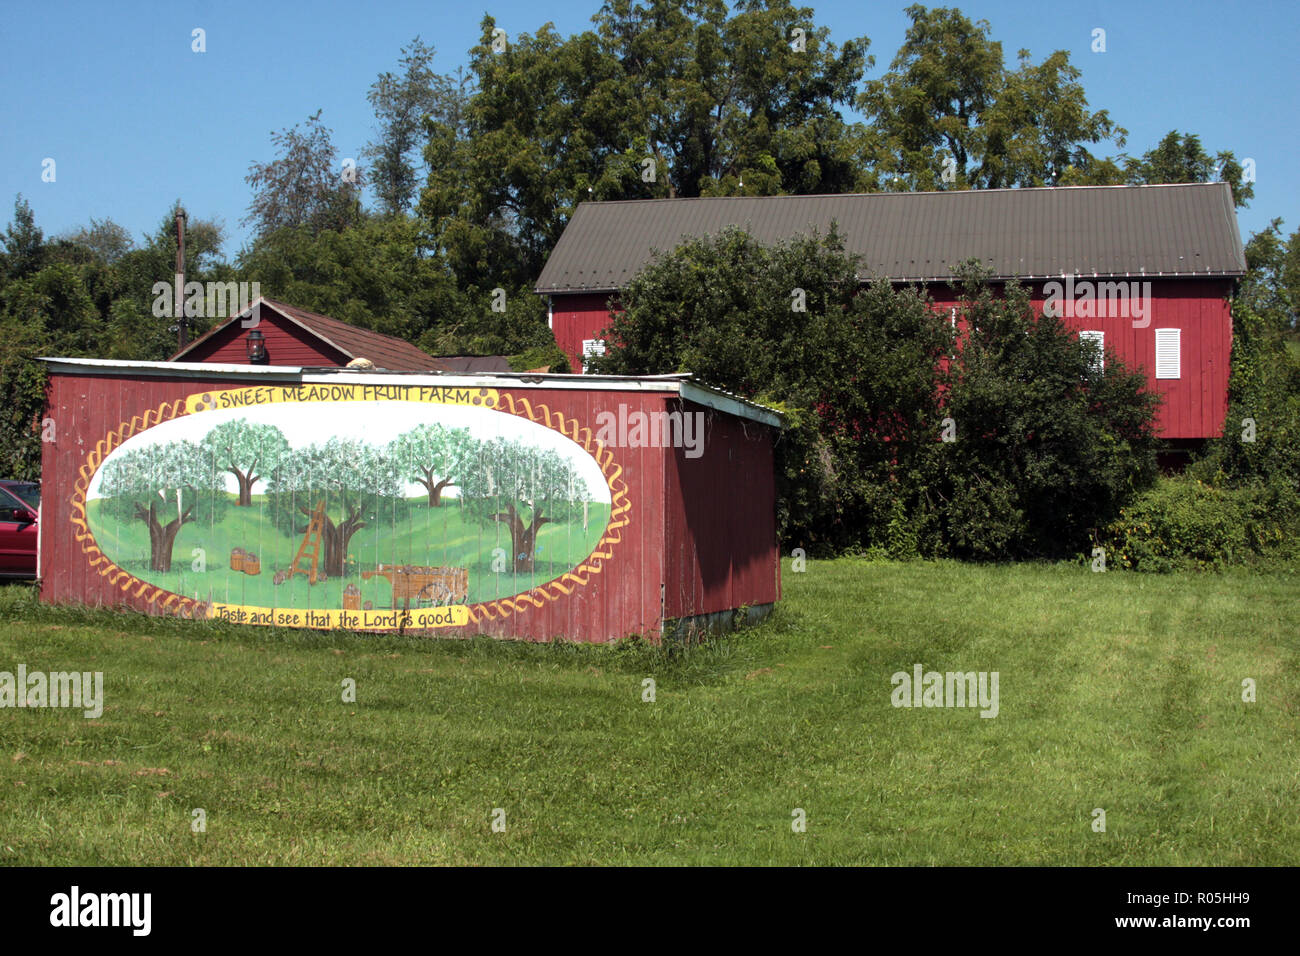 Wooden structures at Seaman's Orchard, Virginia Stock Photo